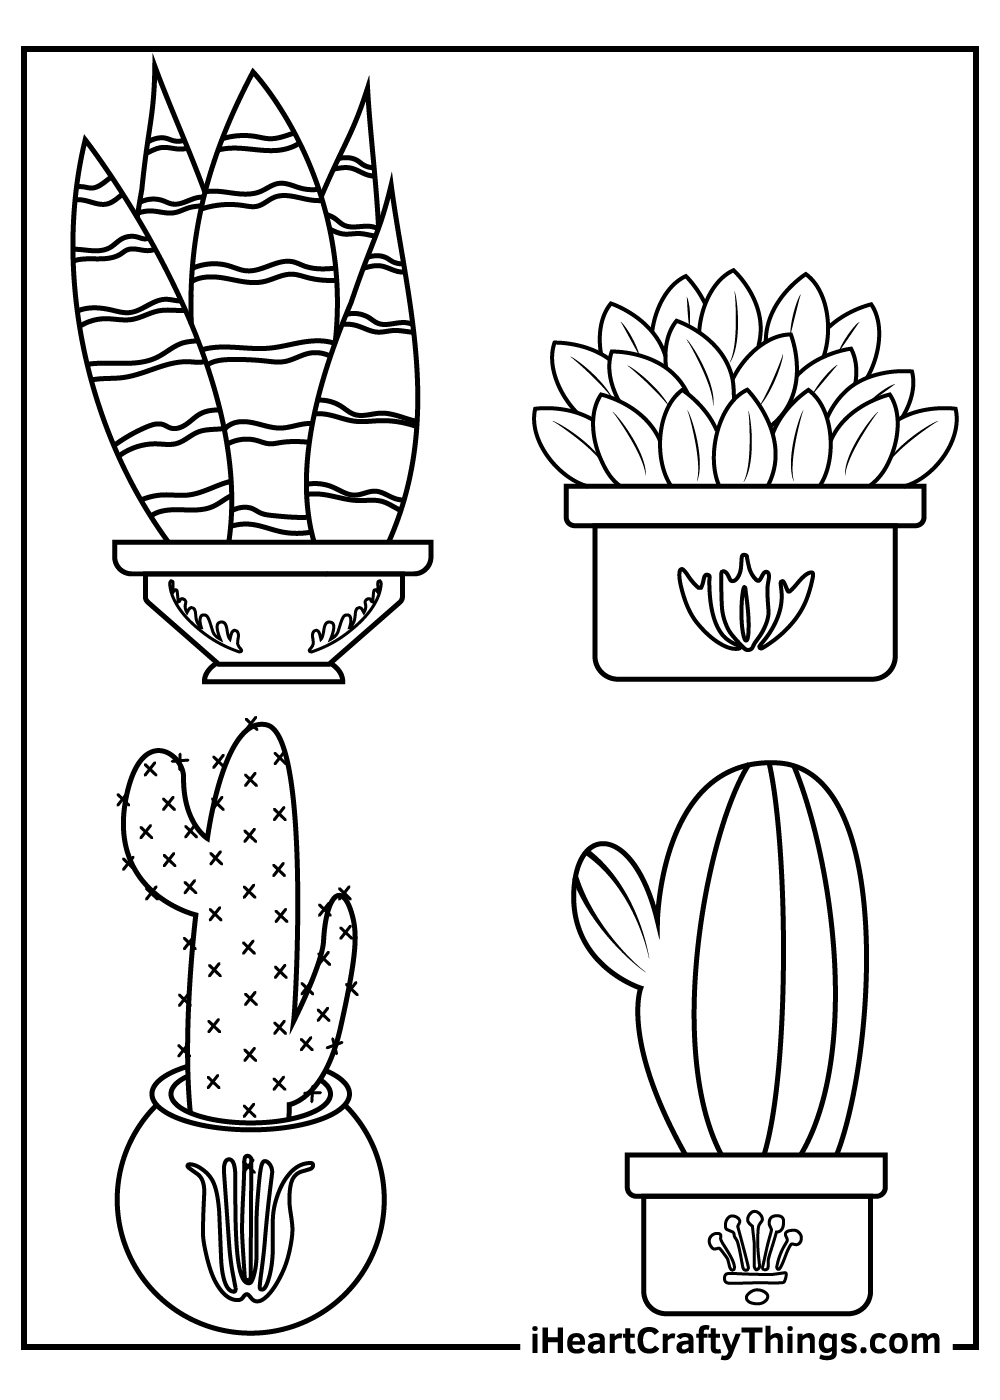 Cactus coloring pages updated